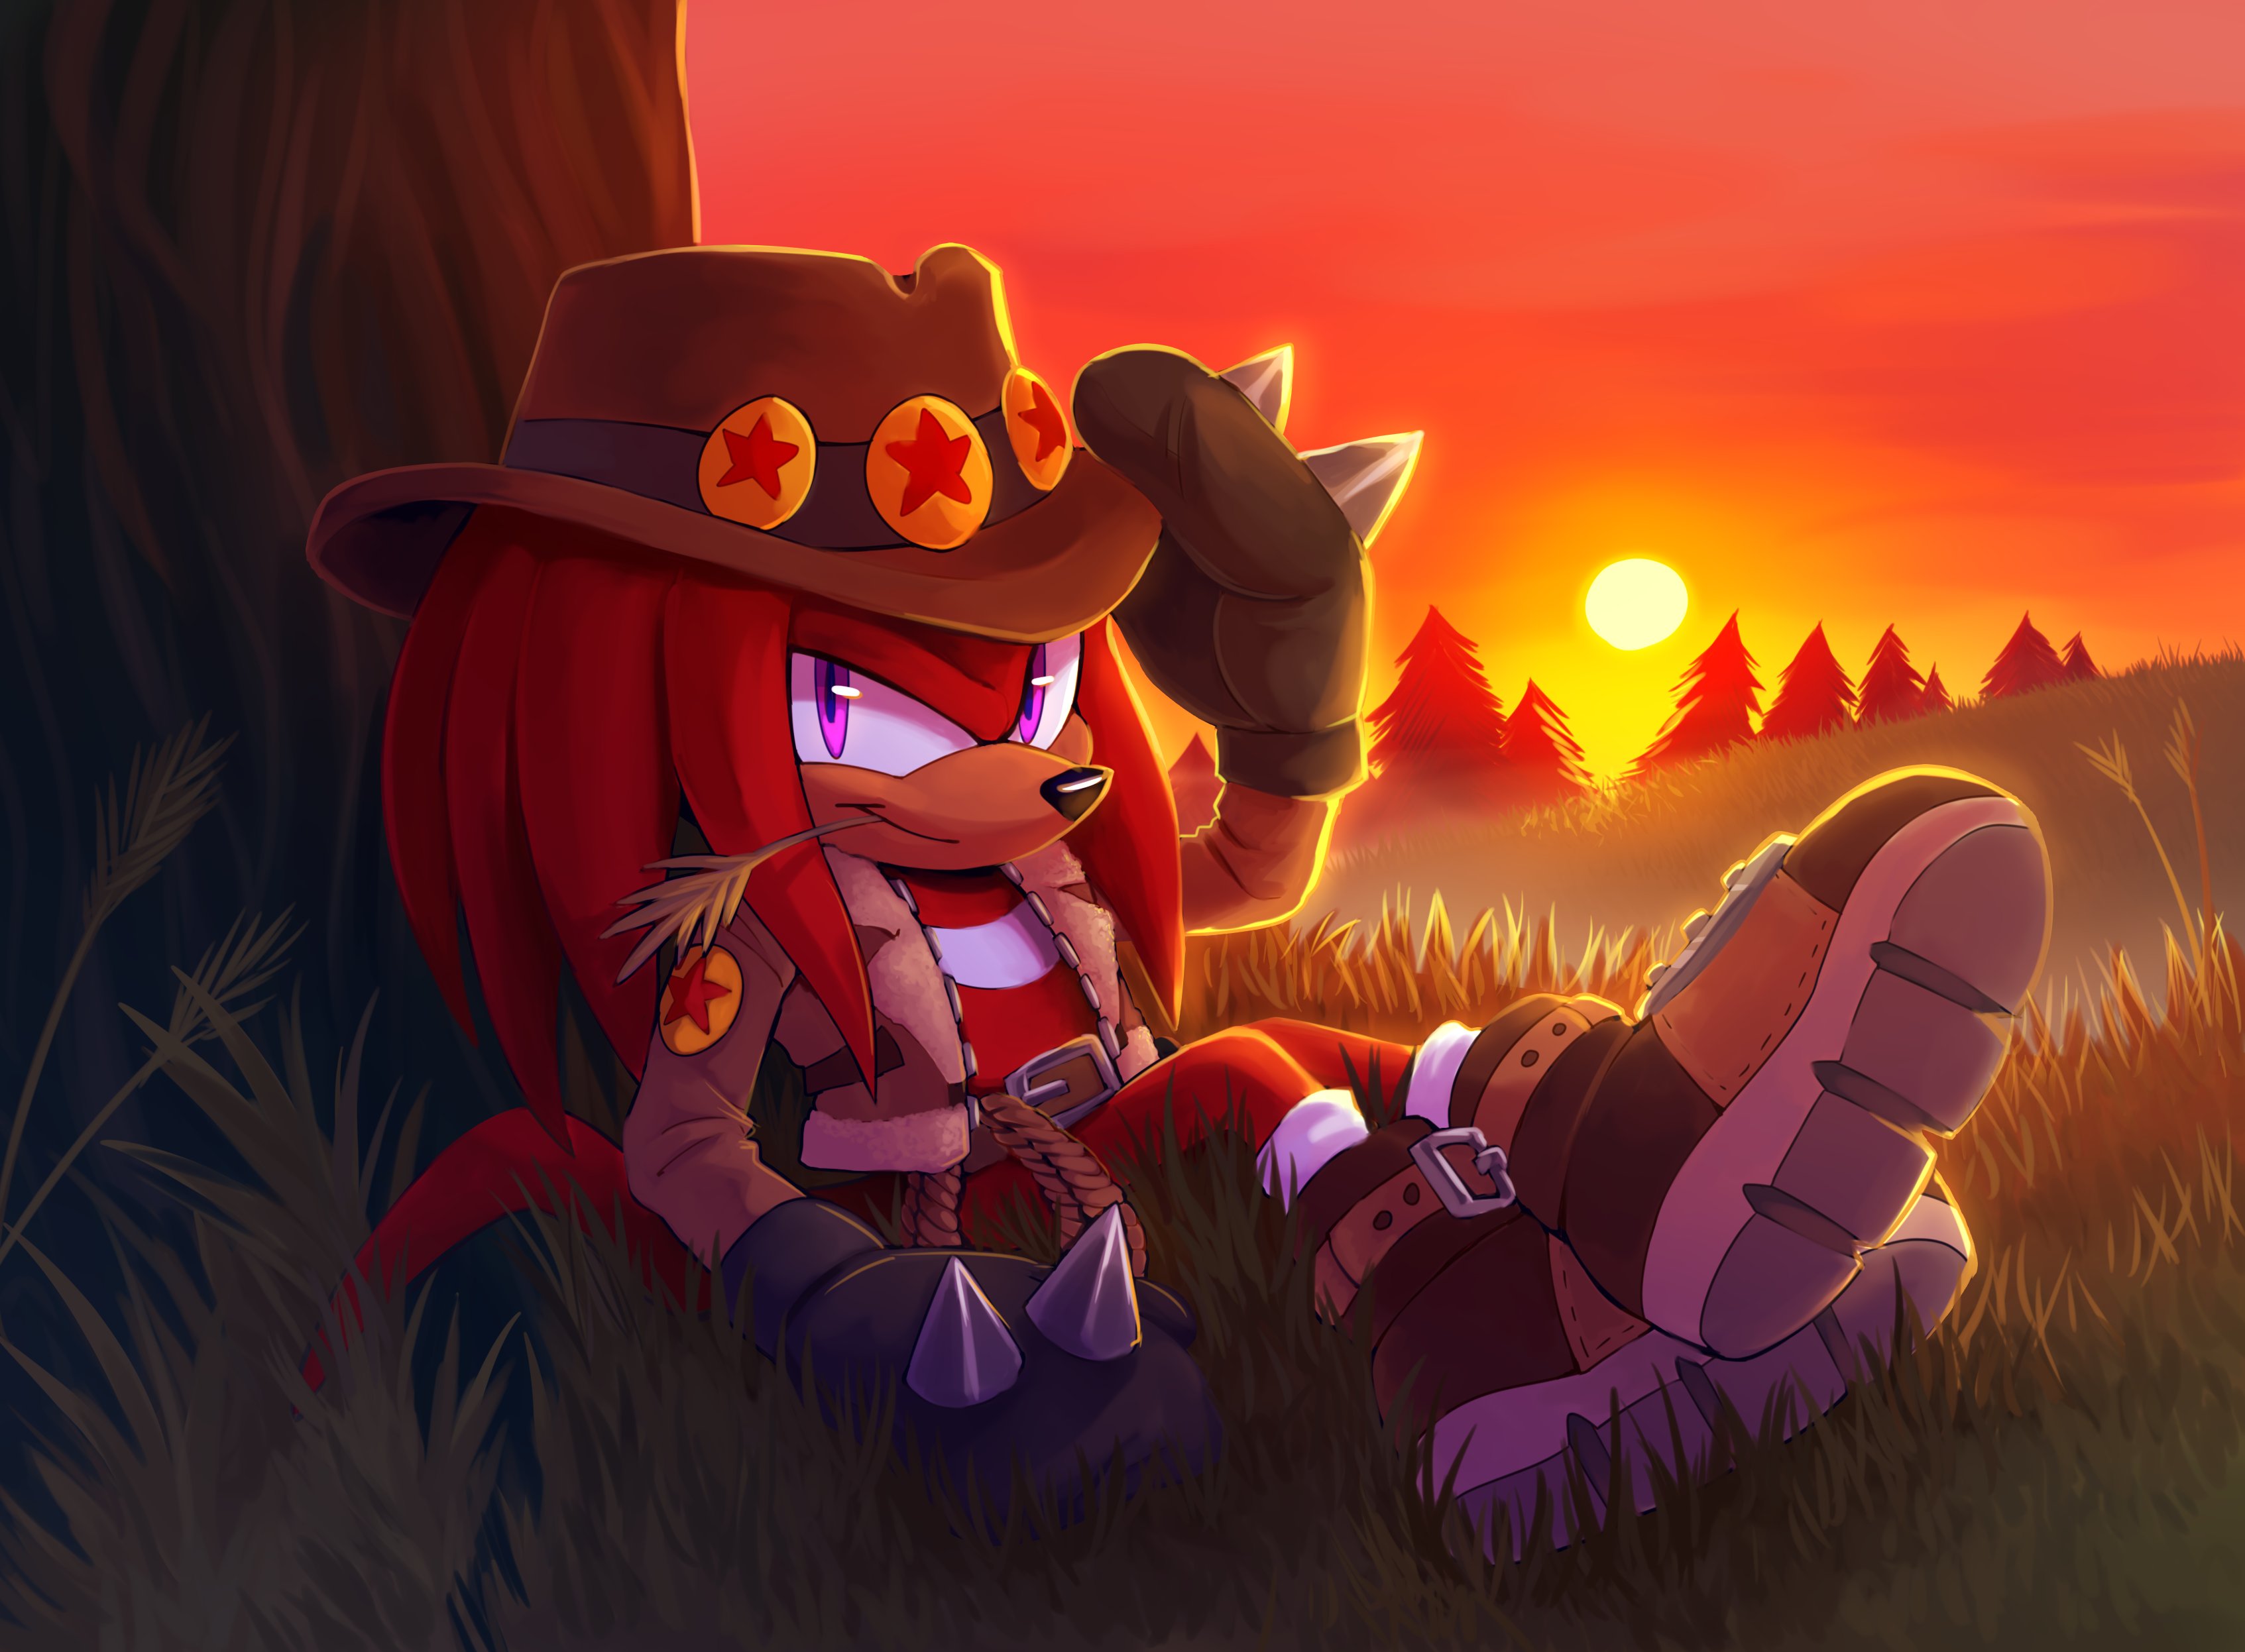 Knuckles the echidna cowboy hat